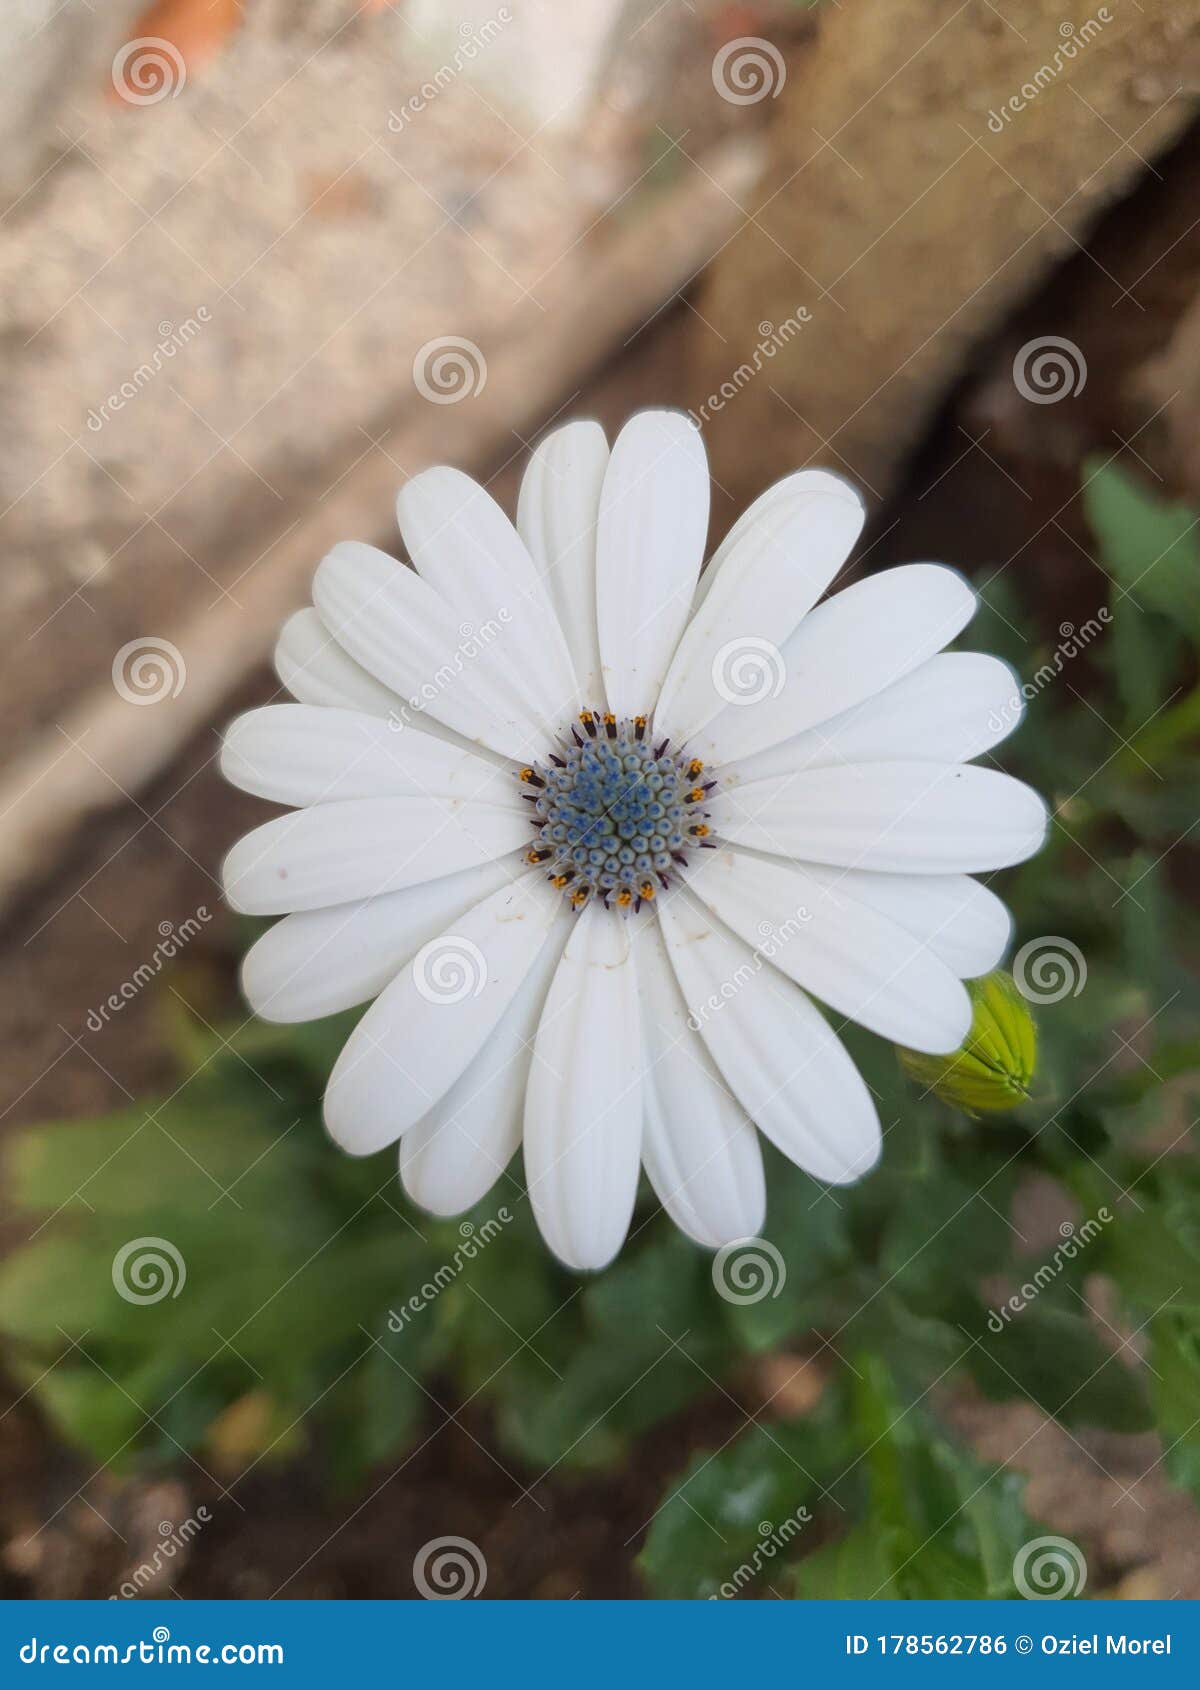 white and beautiful flower